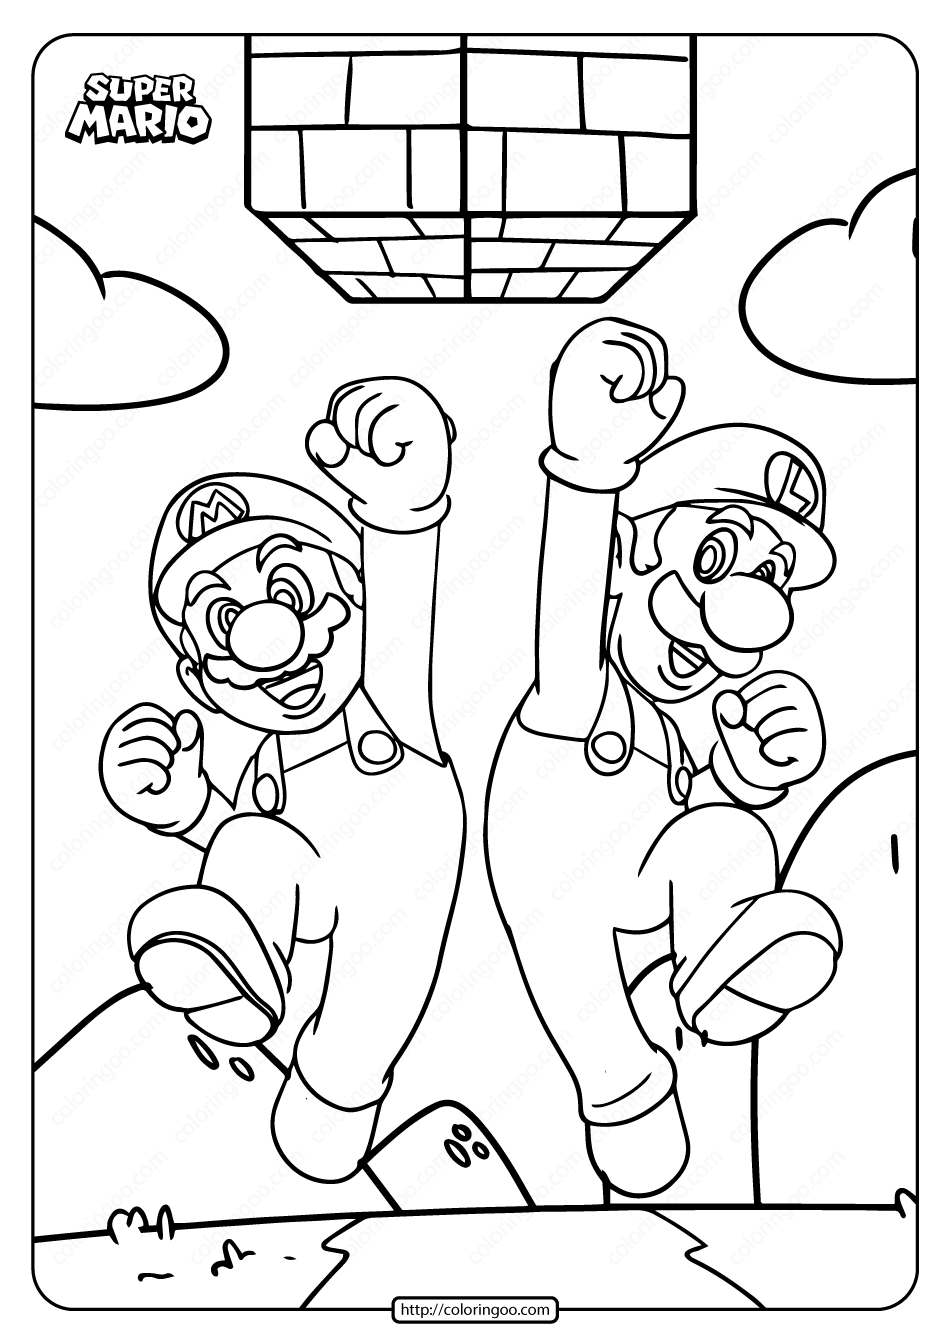 Super Mario Free Printable Coloring Pages Templates Printable Download